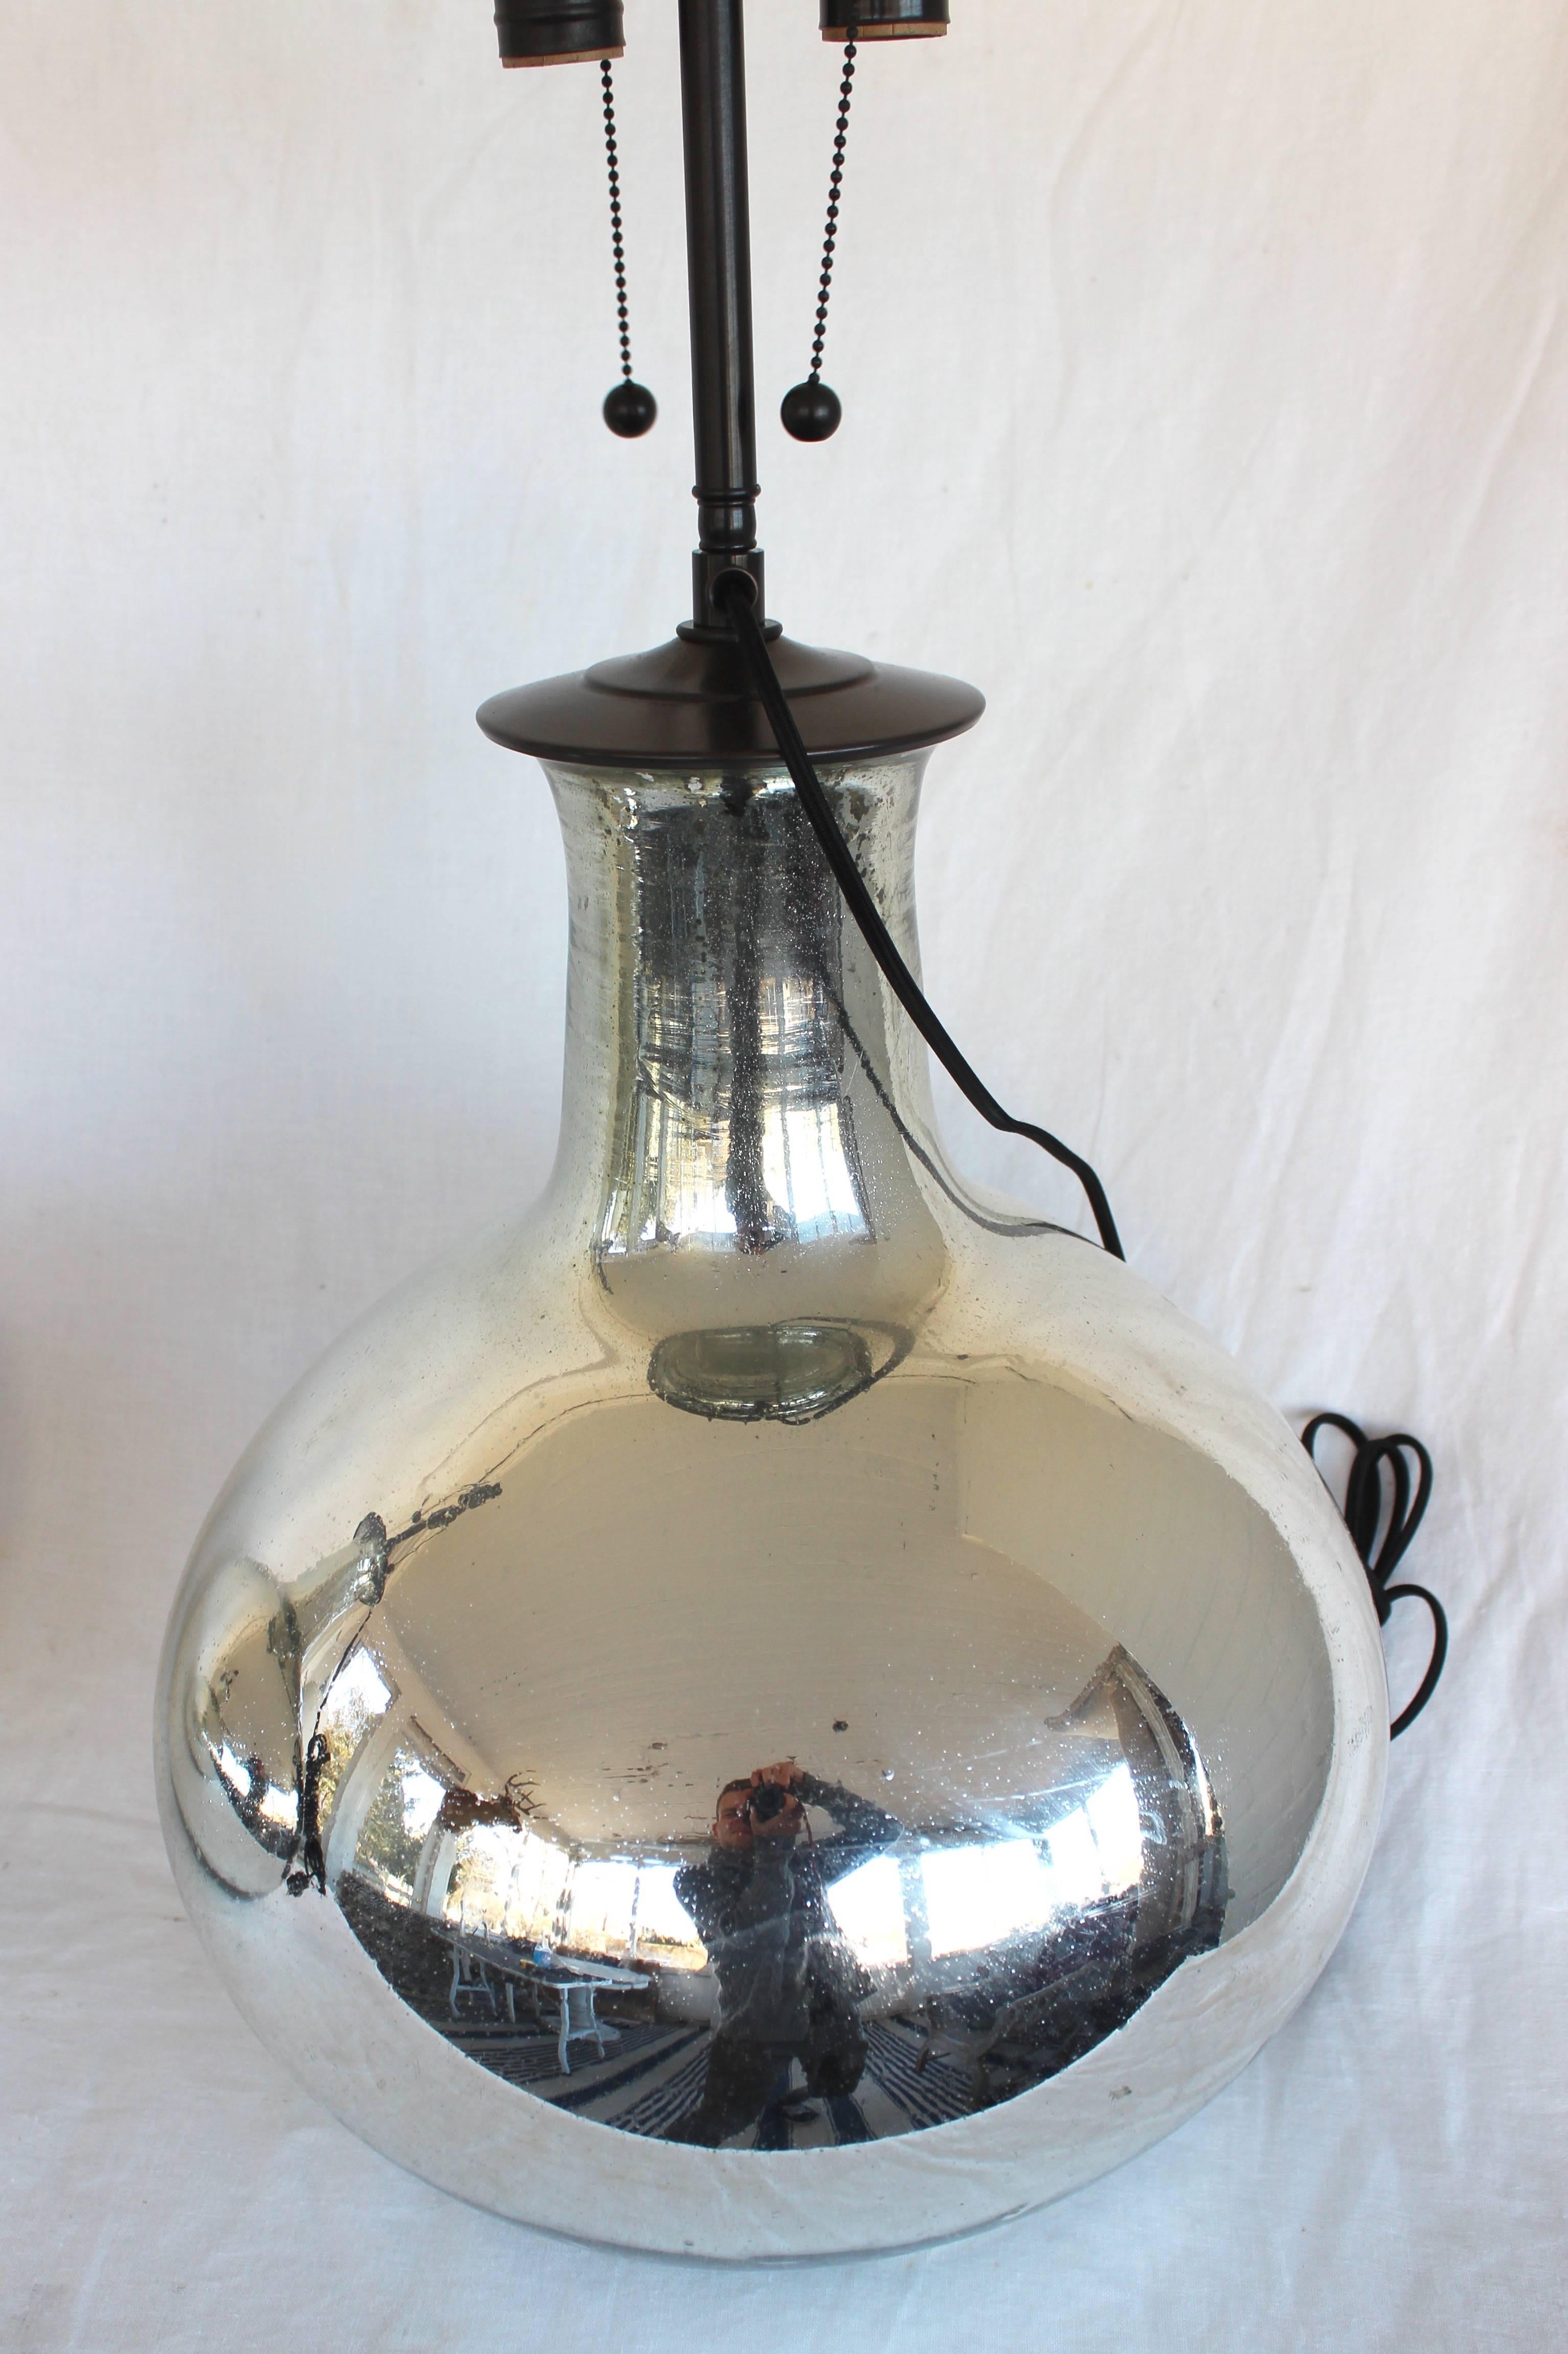 Pair of large mercury glass lamps. All new electrical wiring, sockets, etc.

Measures: Mercury glass height 17